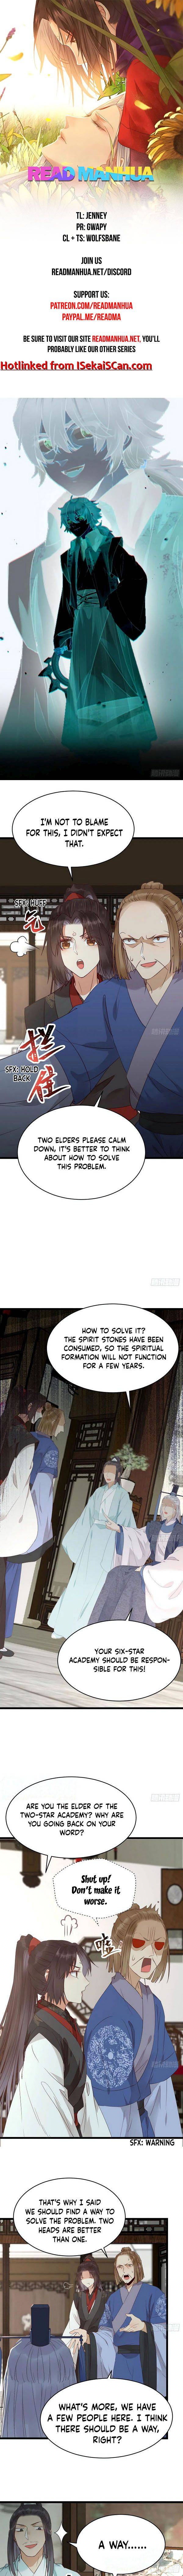 The Ghostly Doctor - Page 1